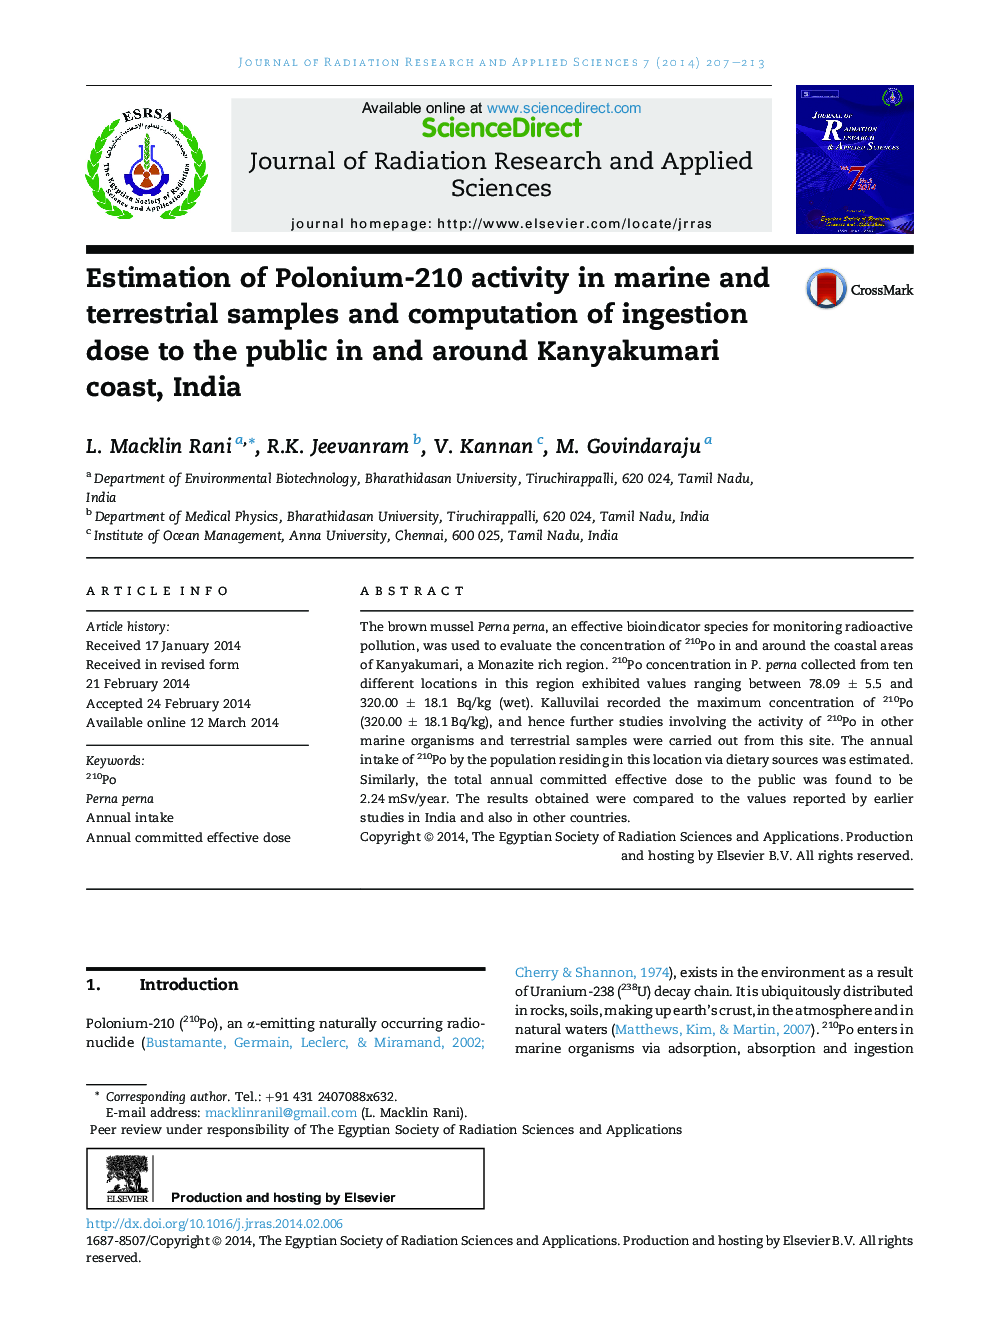 Estimation of Polonium-210 activity in marine and terrestrial samples and computation of ingestion dose to the public in and around Kanyakumari coast, India 